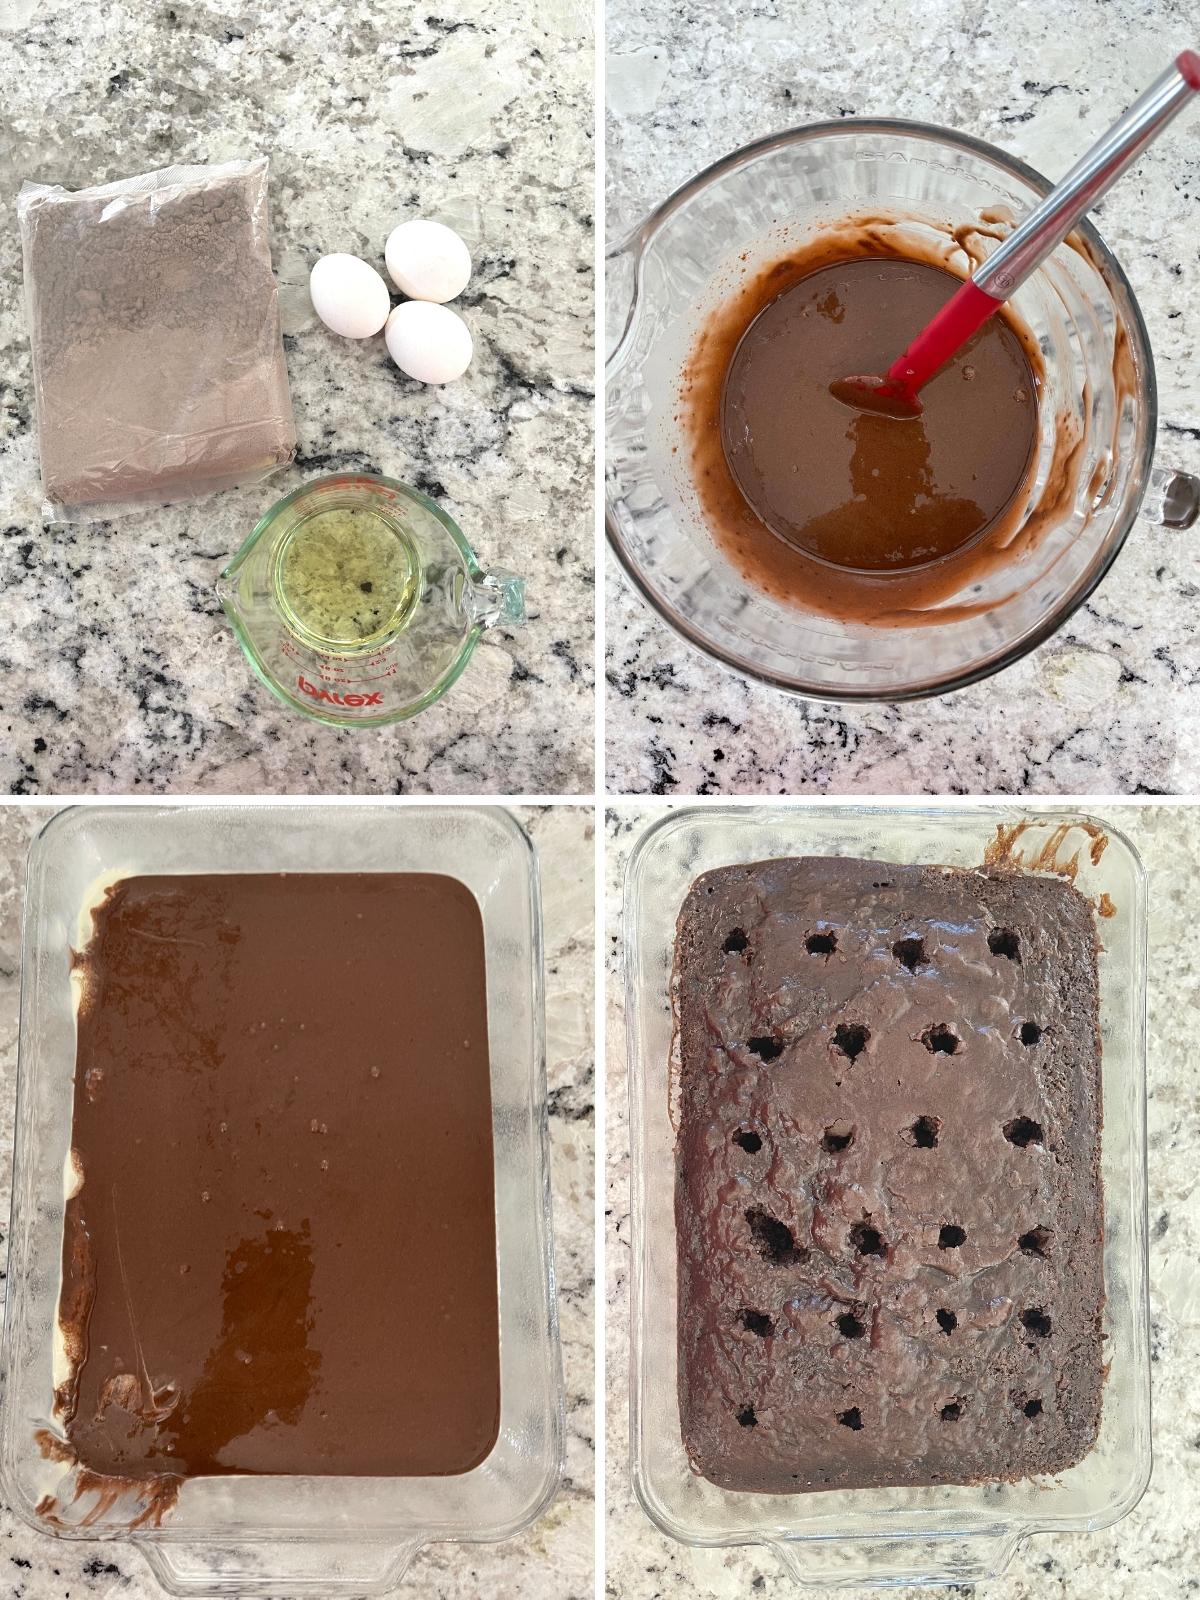 Images showing steps to make cake.